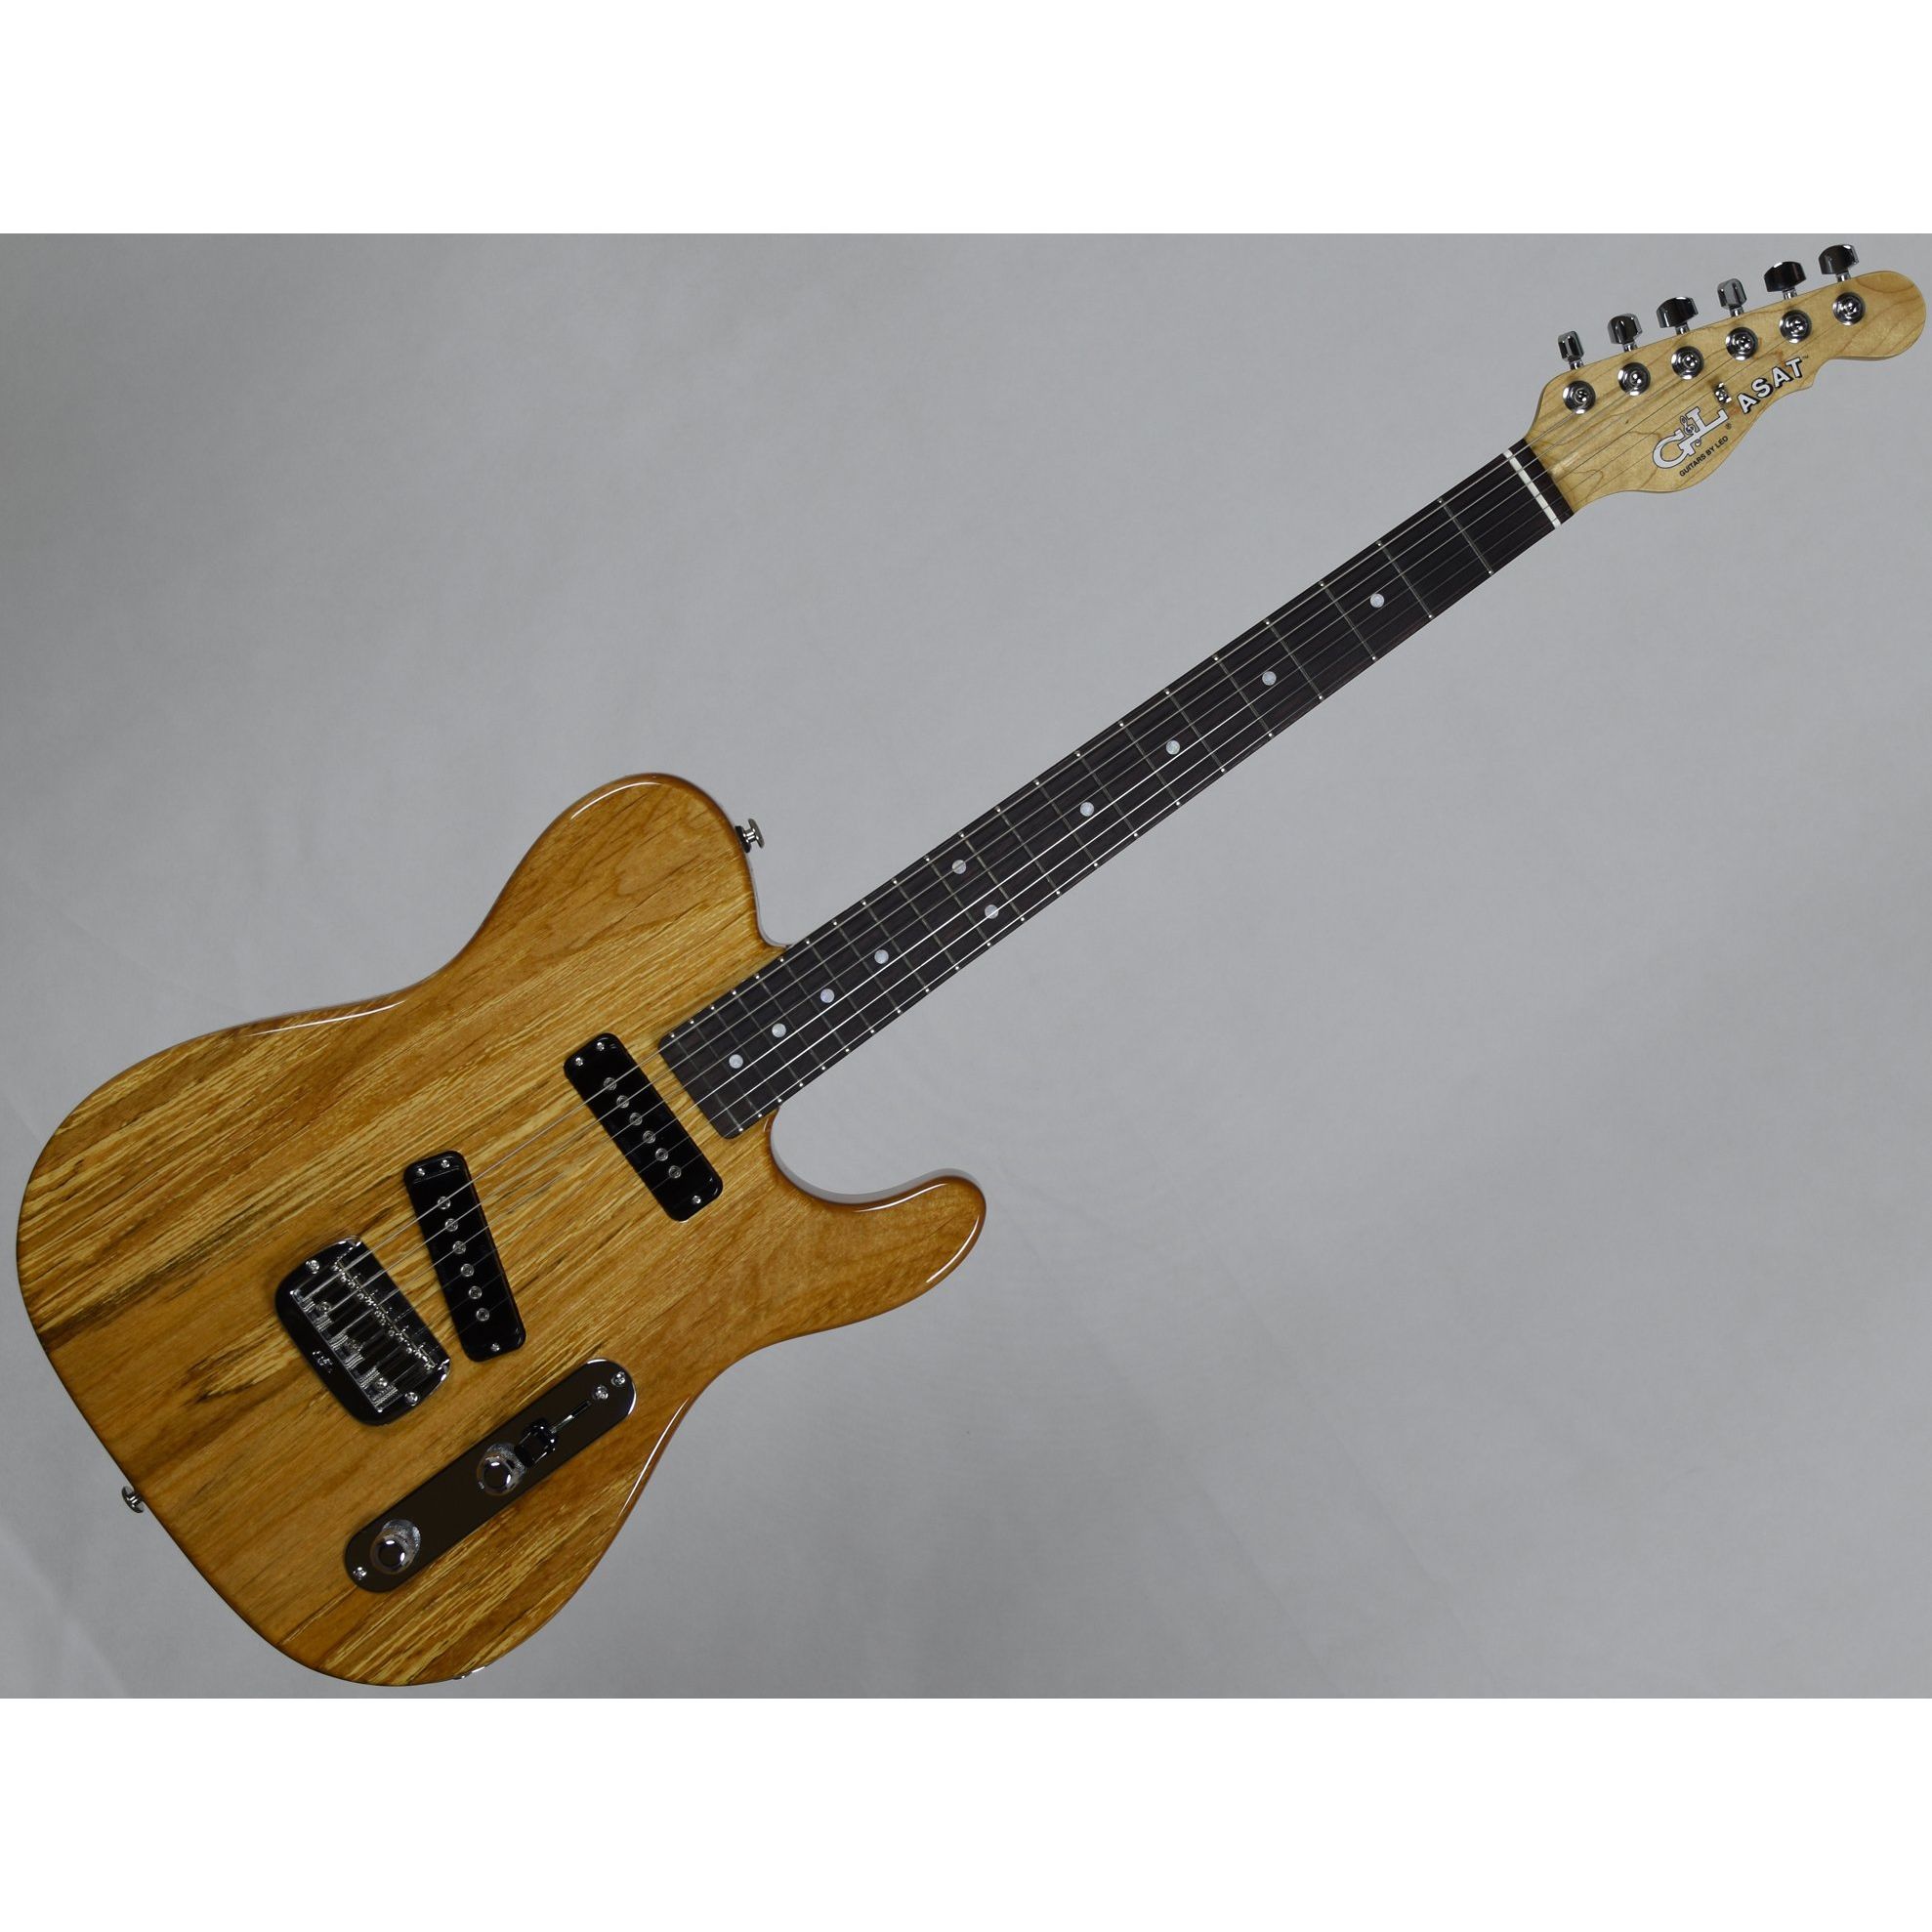 G&L USA ASAT Special Spalted Alder Top Electric Guitar in Natural Gloss  Finish